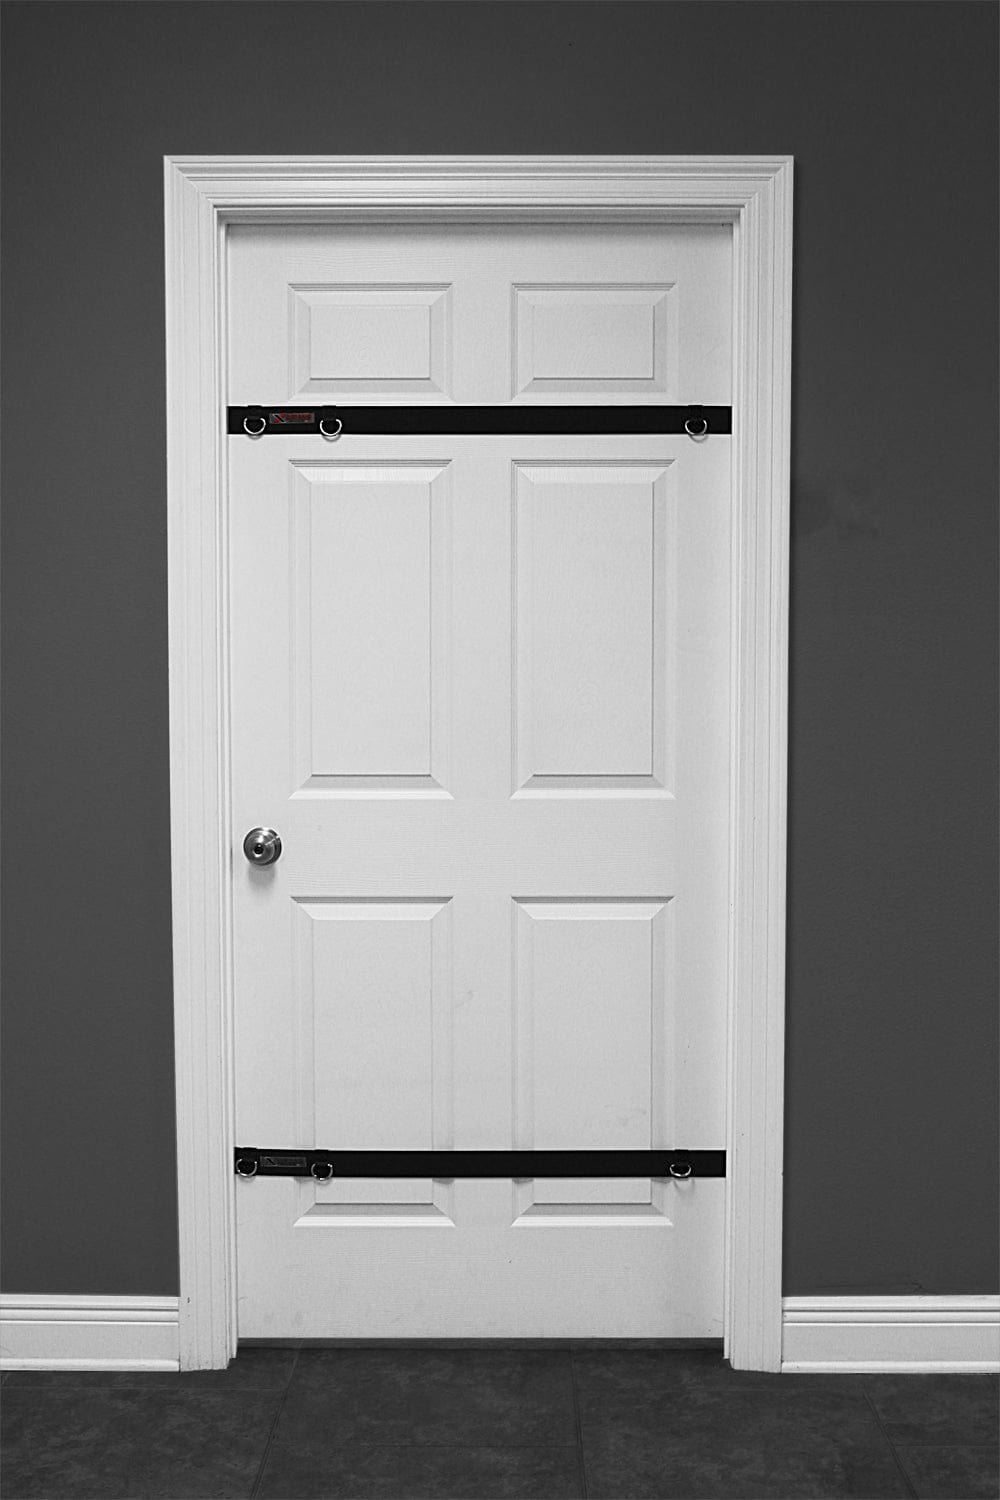 Resistance Band Door anchors for indoors. Fits Wide to narrow doors and comes with 2 straps. Each strap has heavy duty velcro and is made of non-slip and non-damaging custom woven  webbing. This anchor has 3 anchor points per strap so it fits all door sizes easily and allows a variety of uses. 